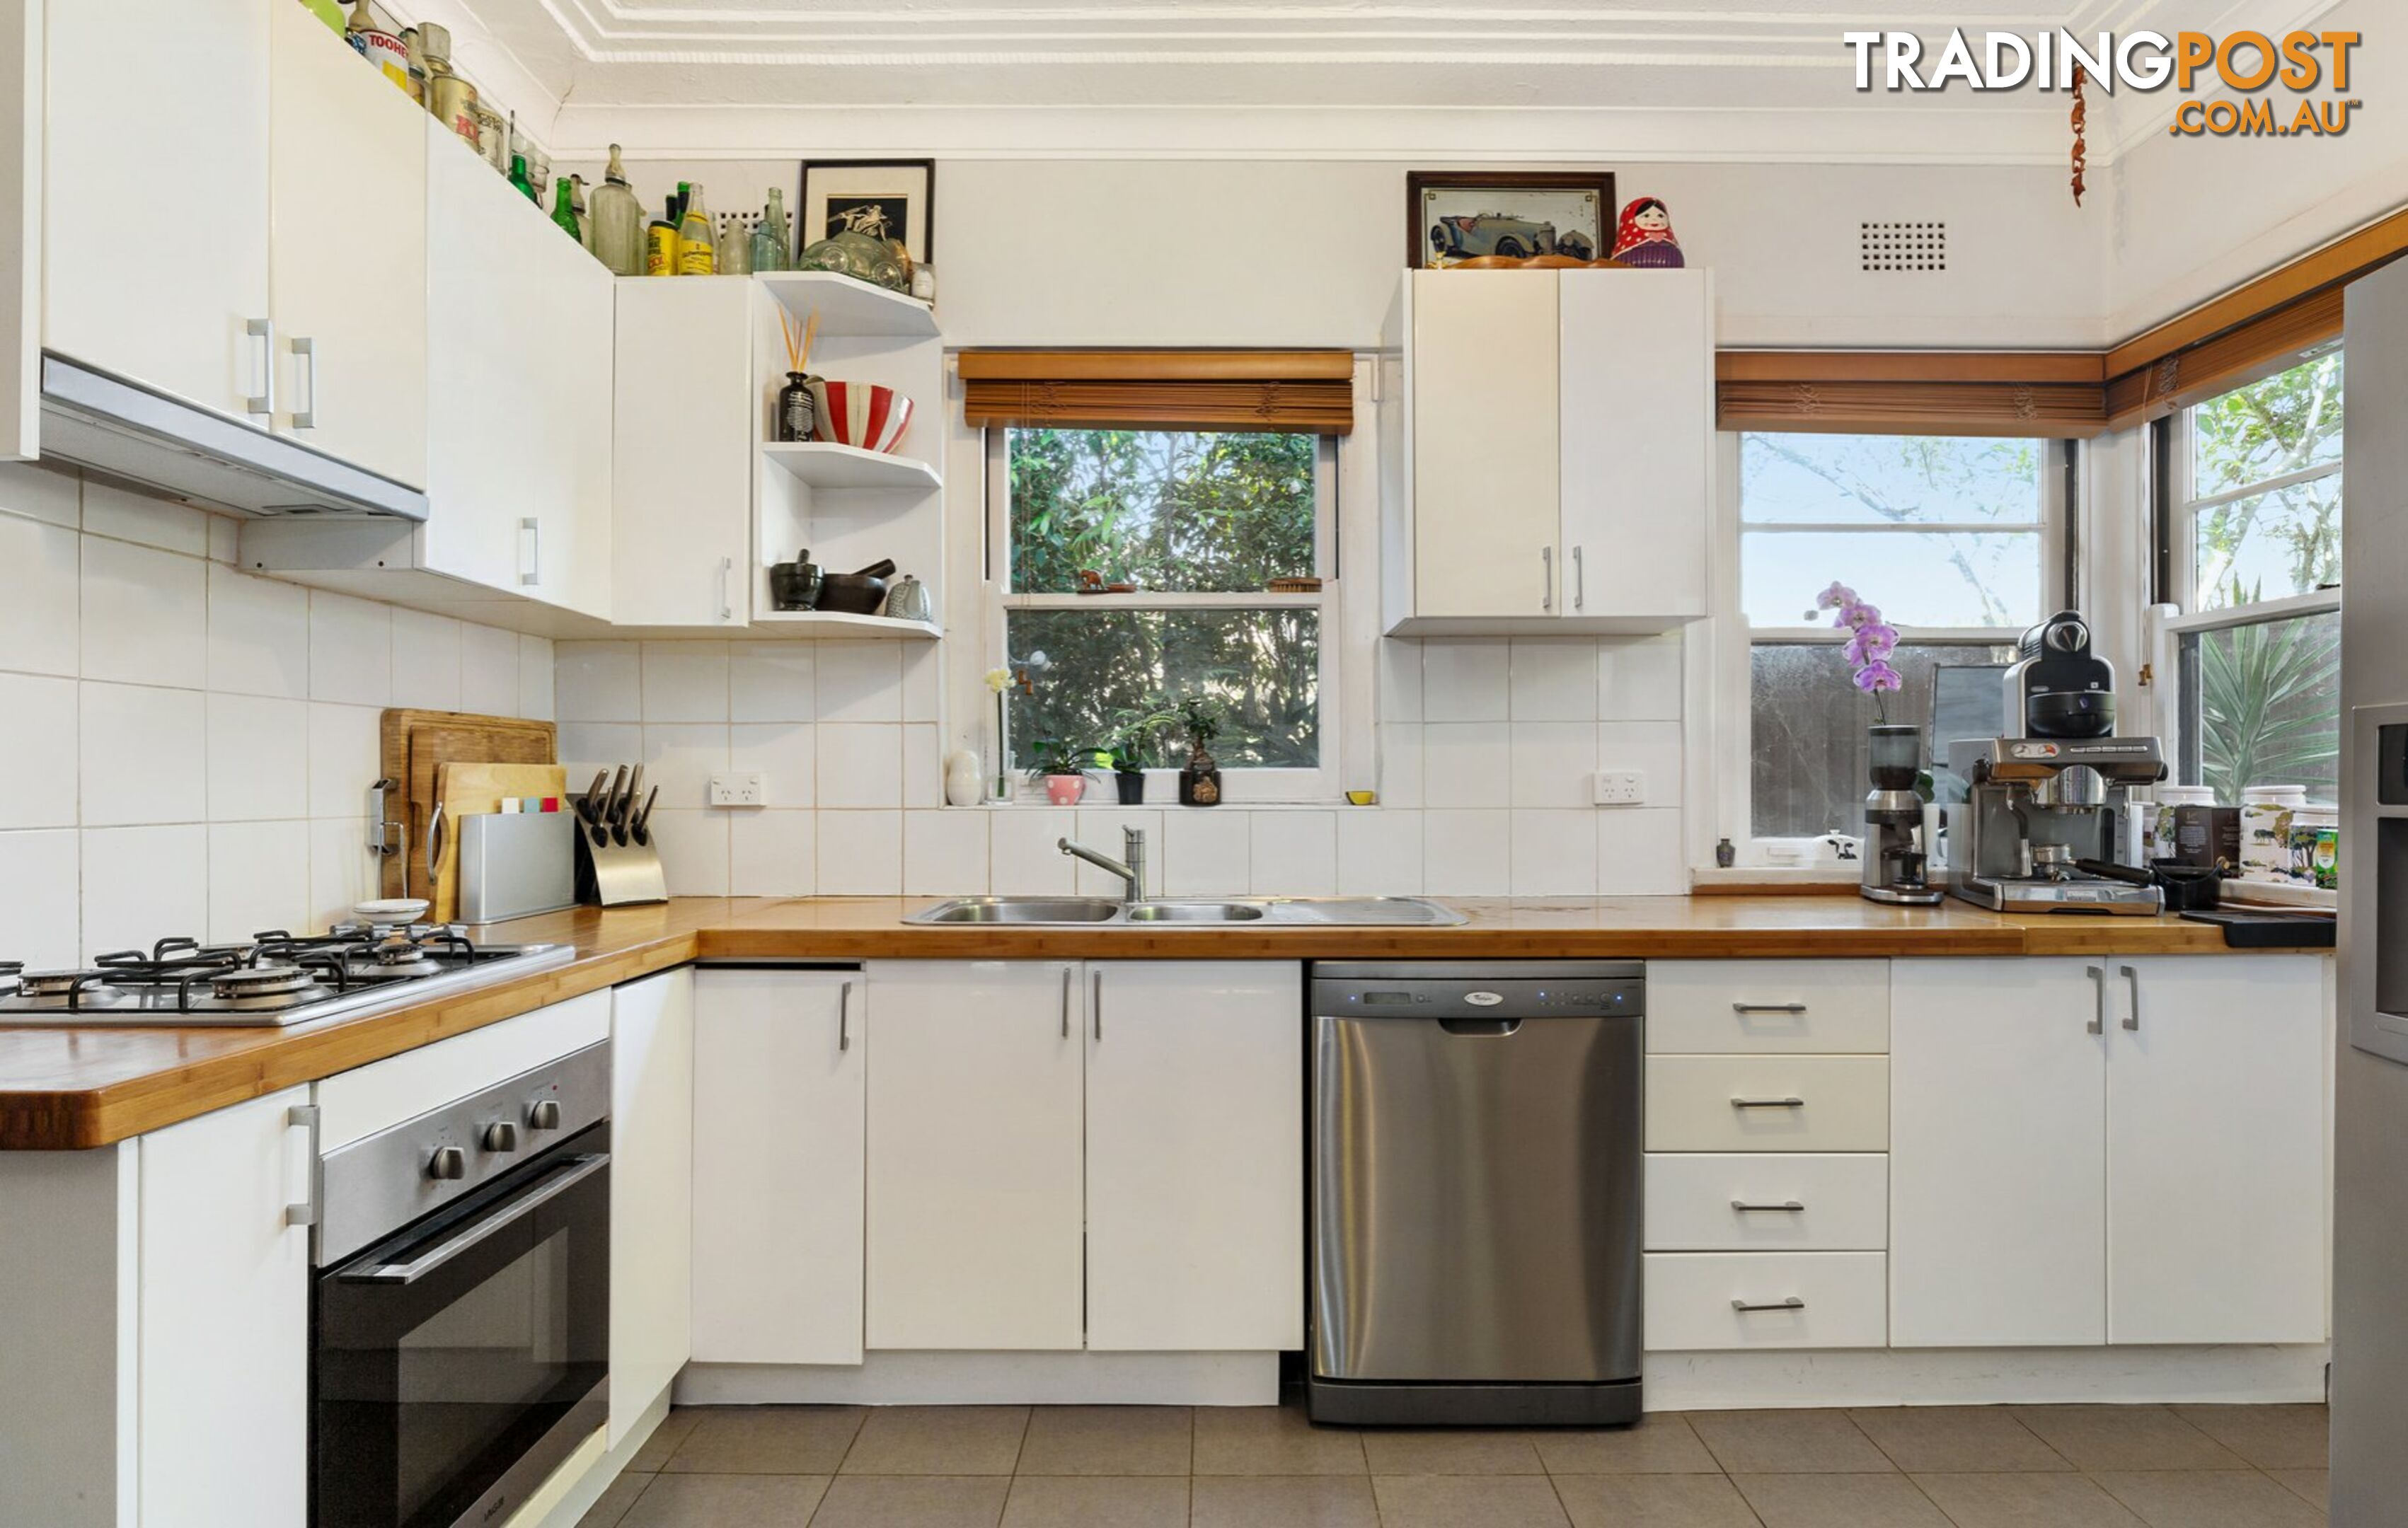 39 River Road West LANE COVE NSW 2066